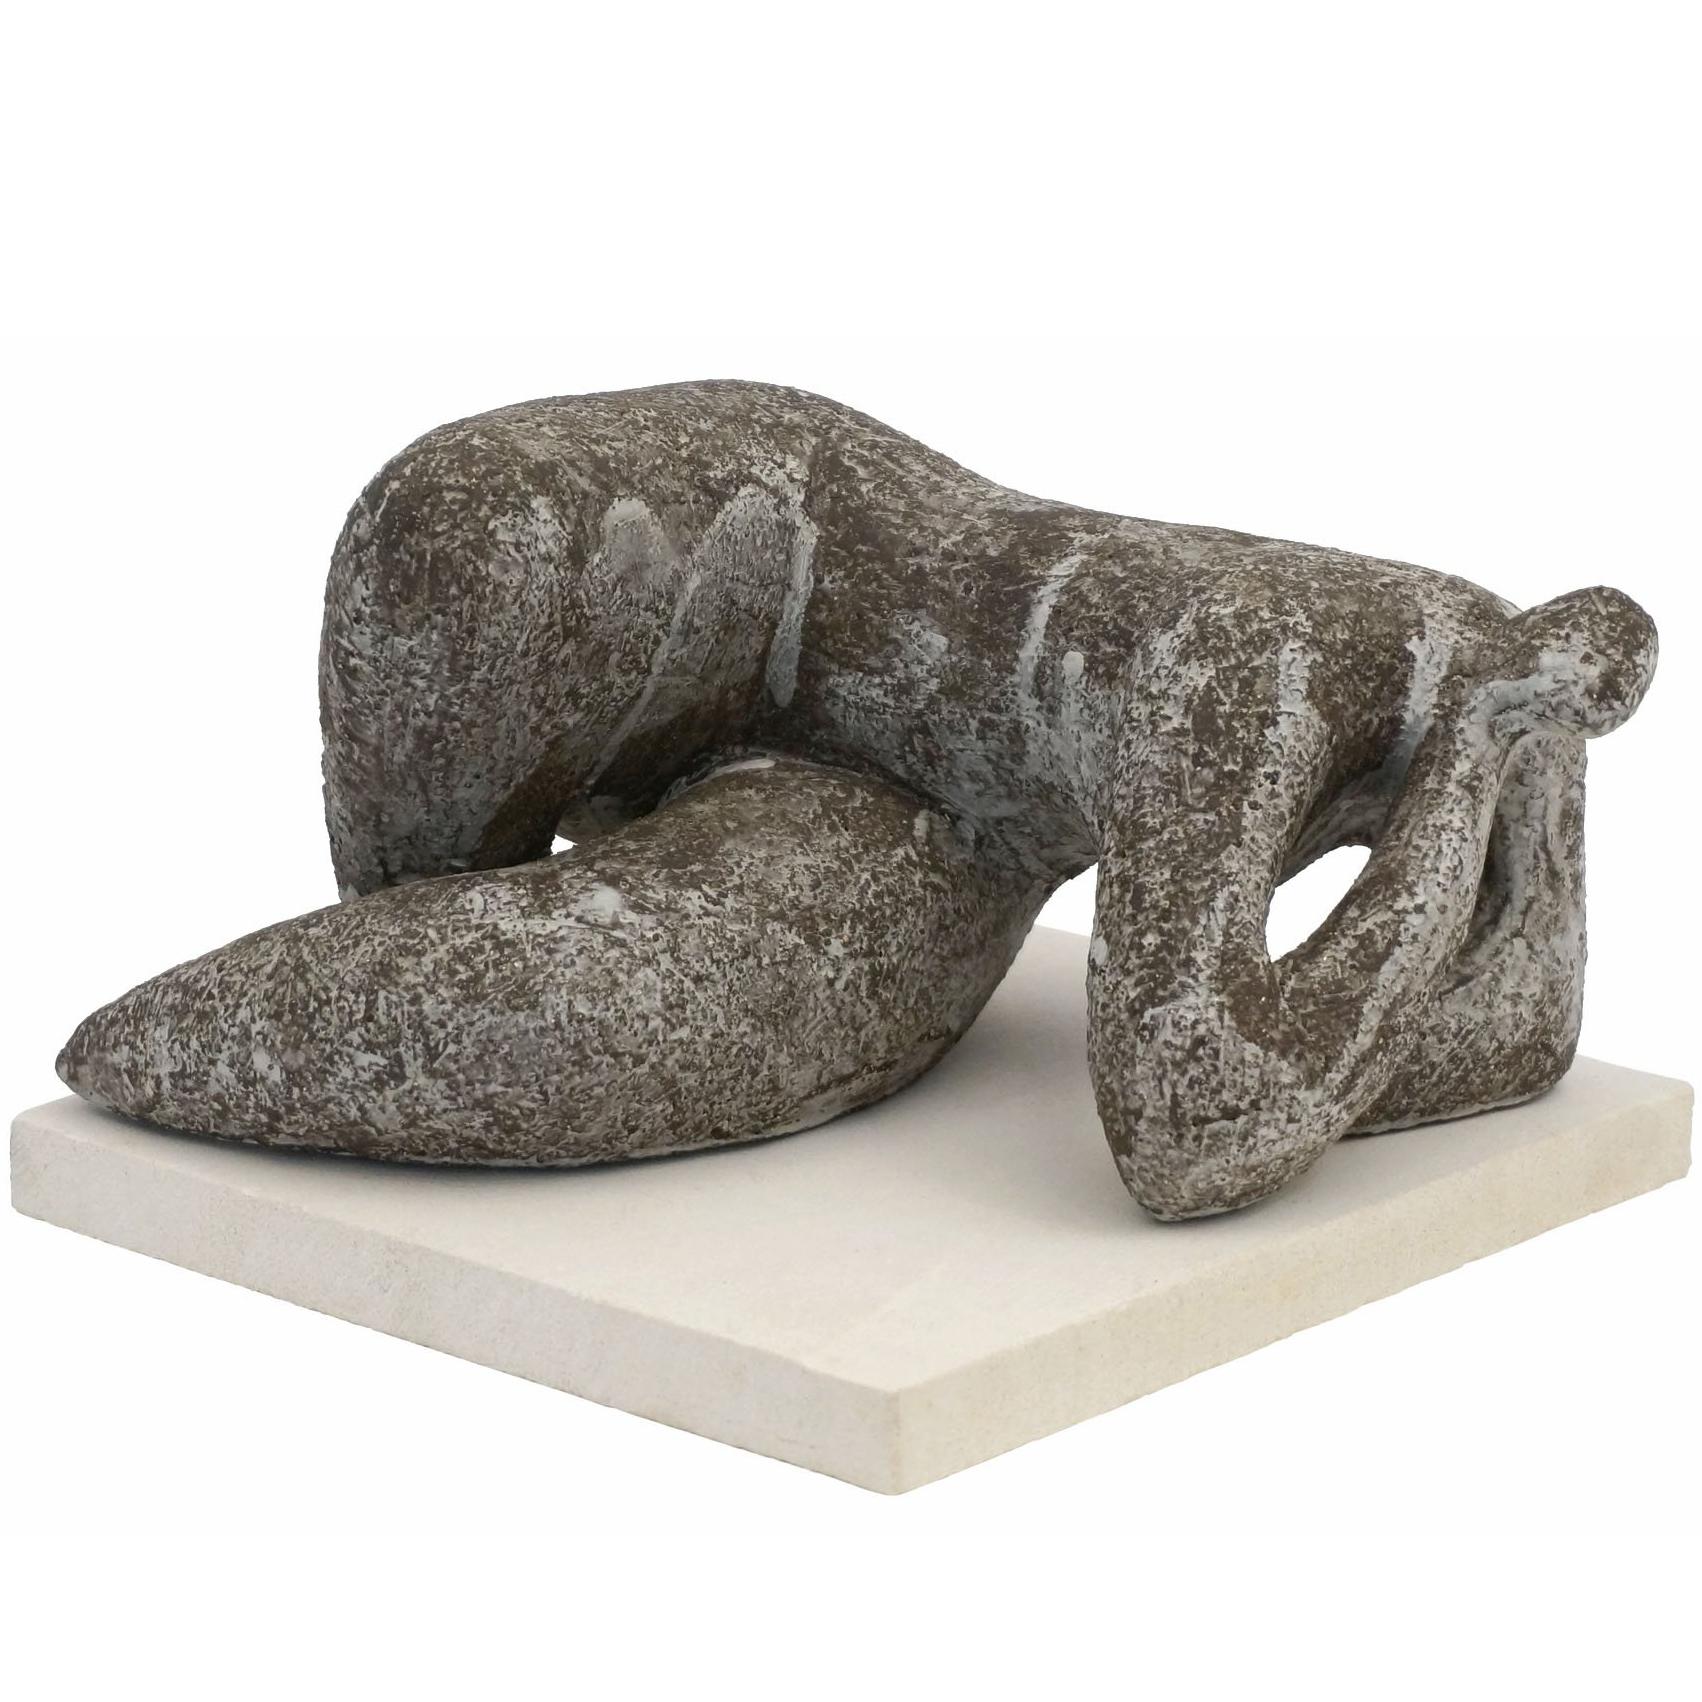 Reclining Figurative Gres Noir Sculpture on Stone Base by Cristelle Berberian For Sale